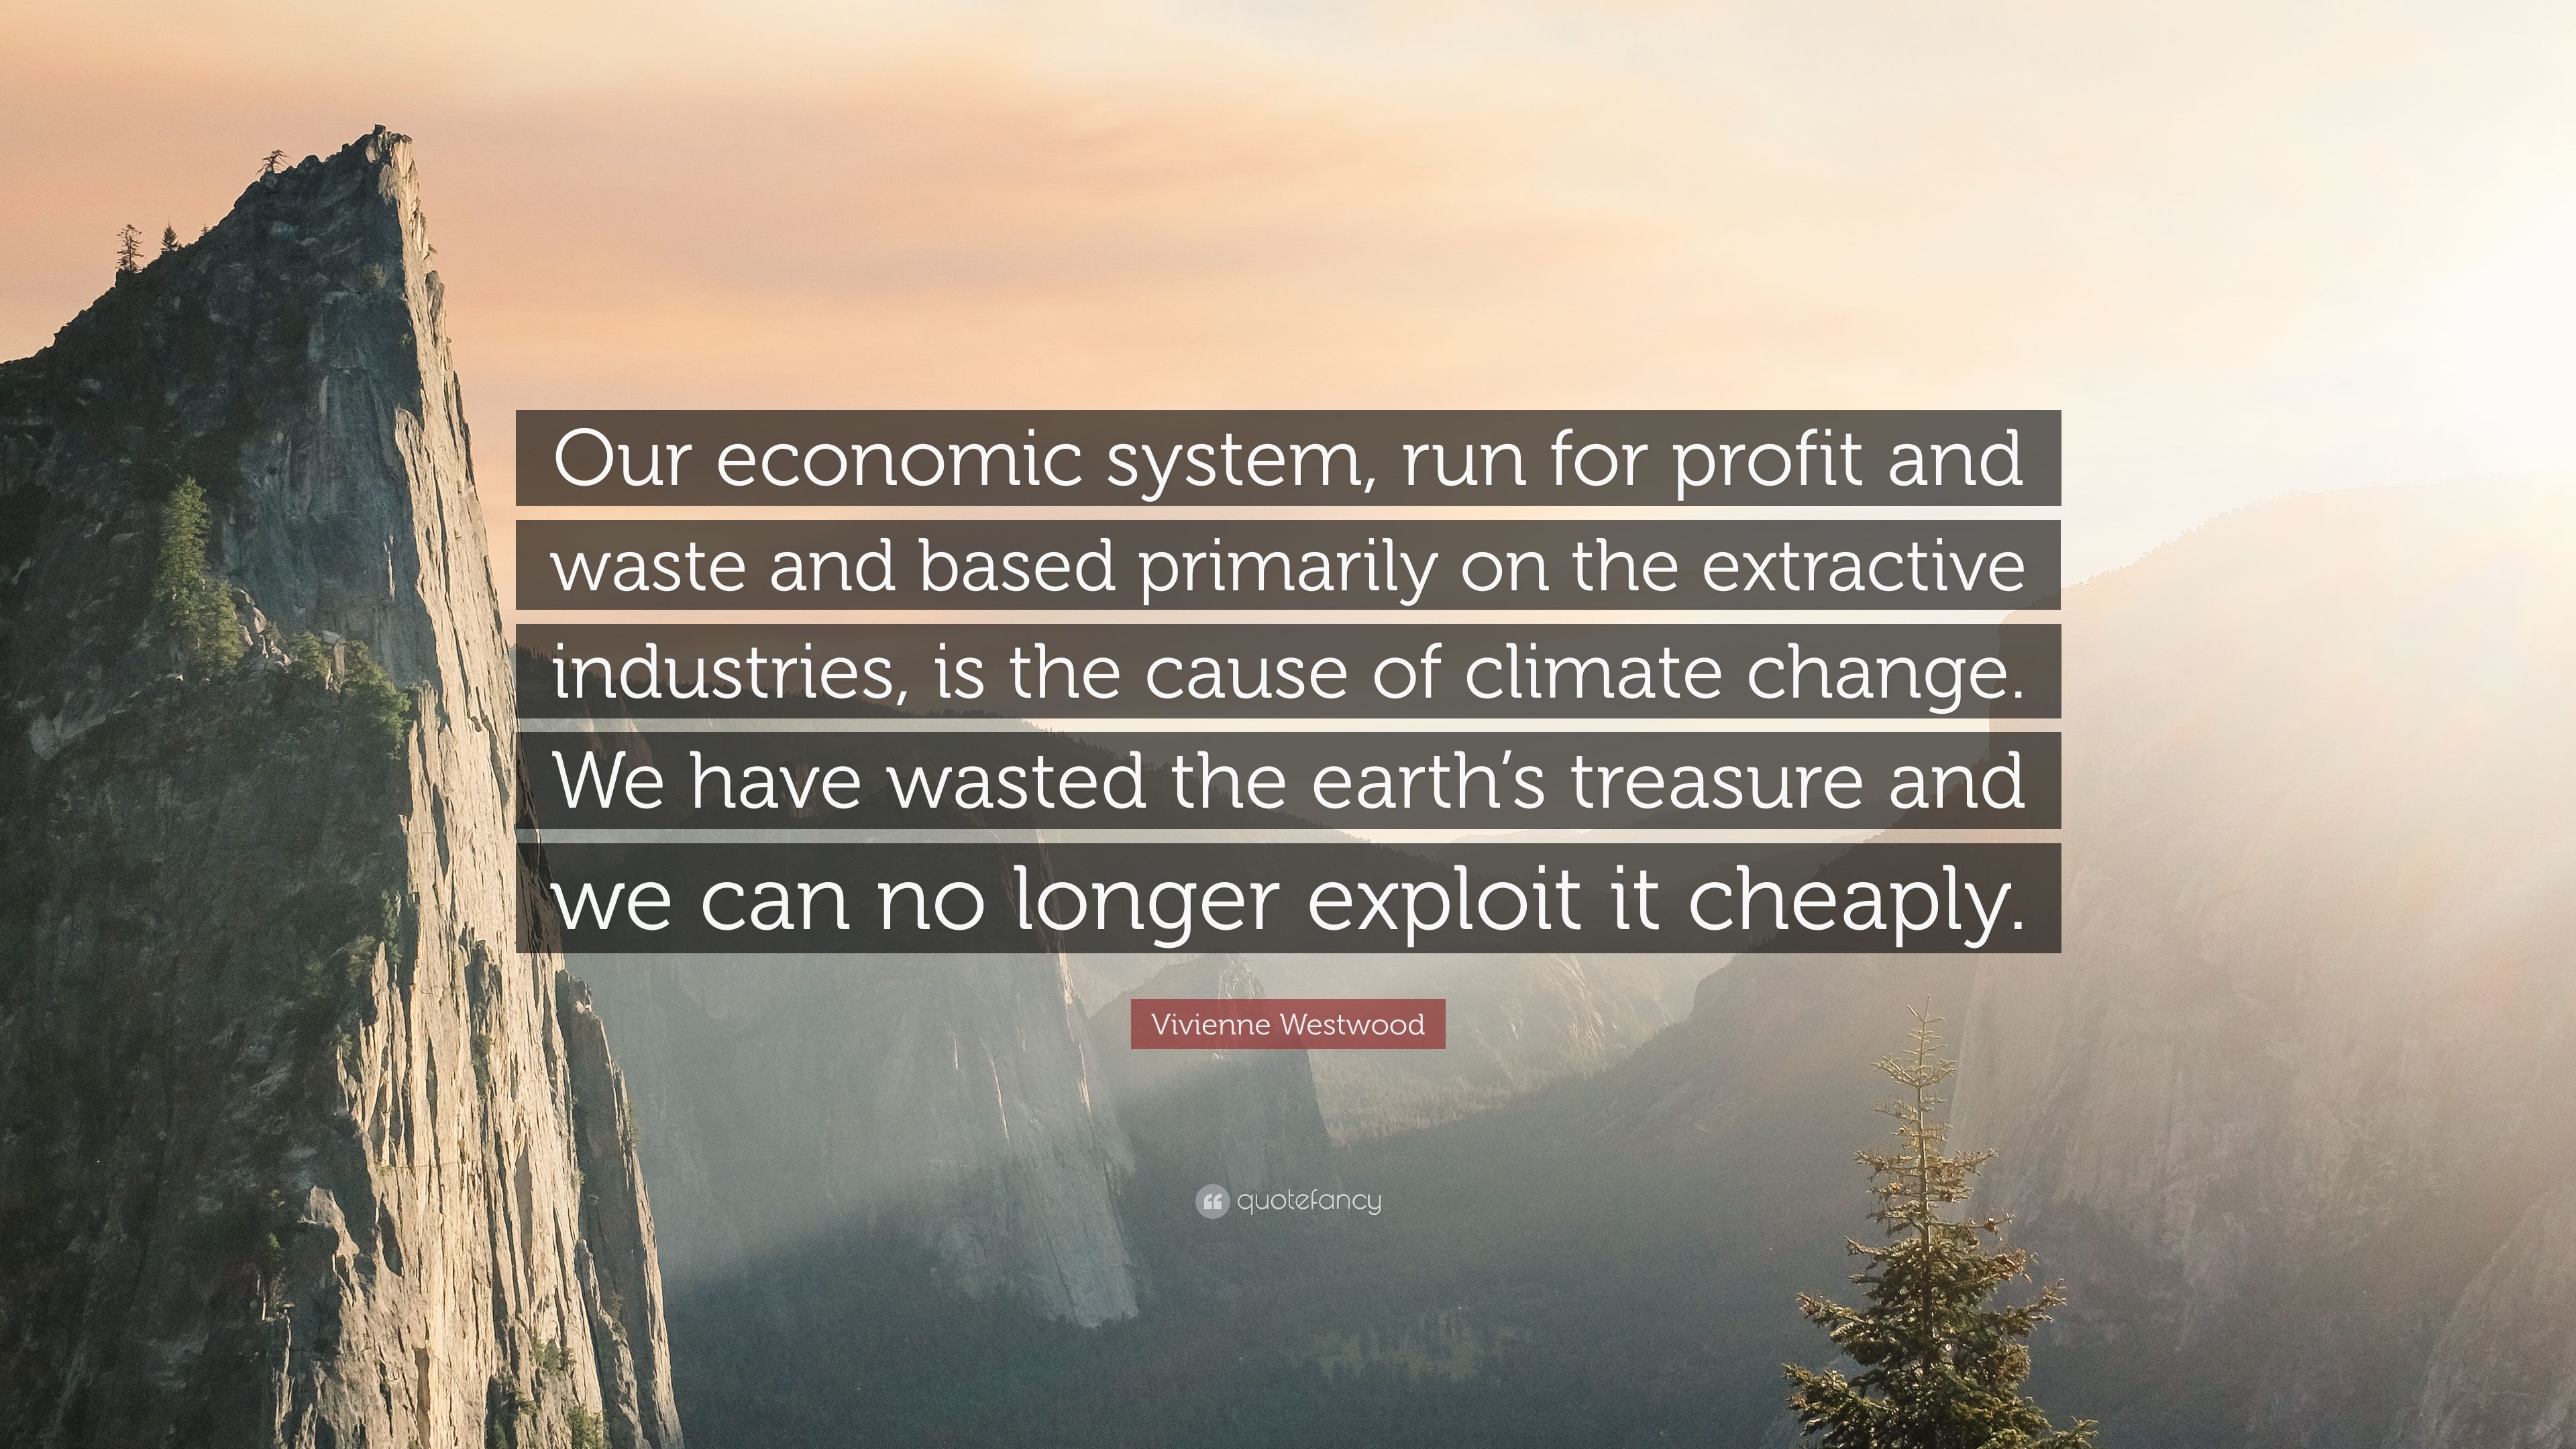 Vivienne Westwood Quote: “Our economic system, run for profit and ...